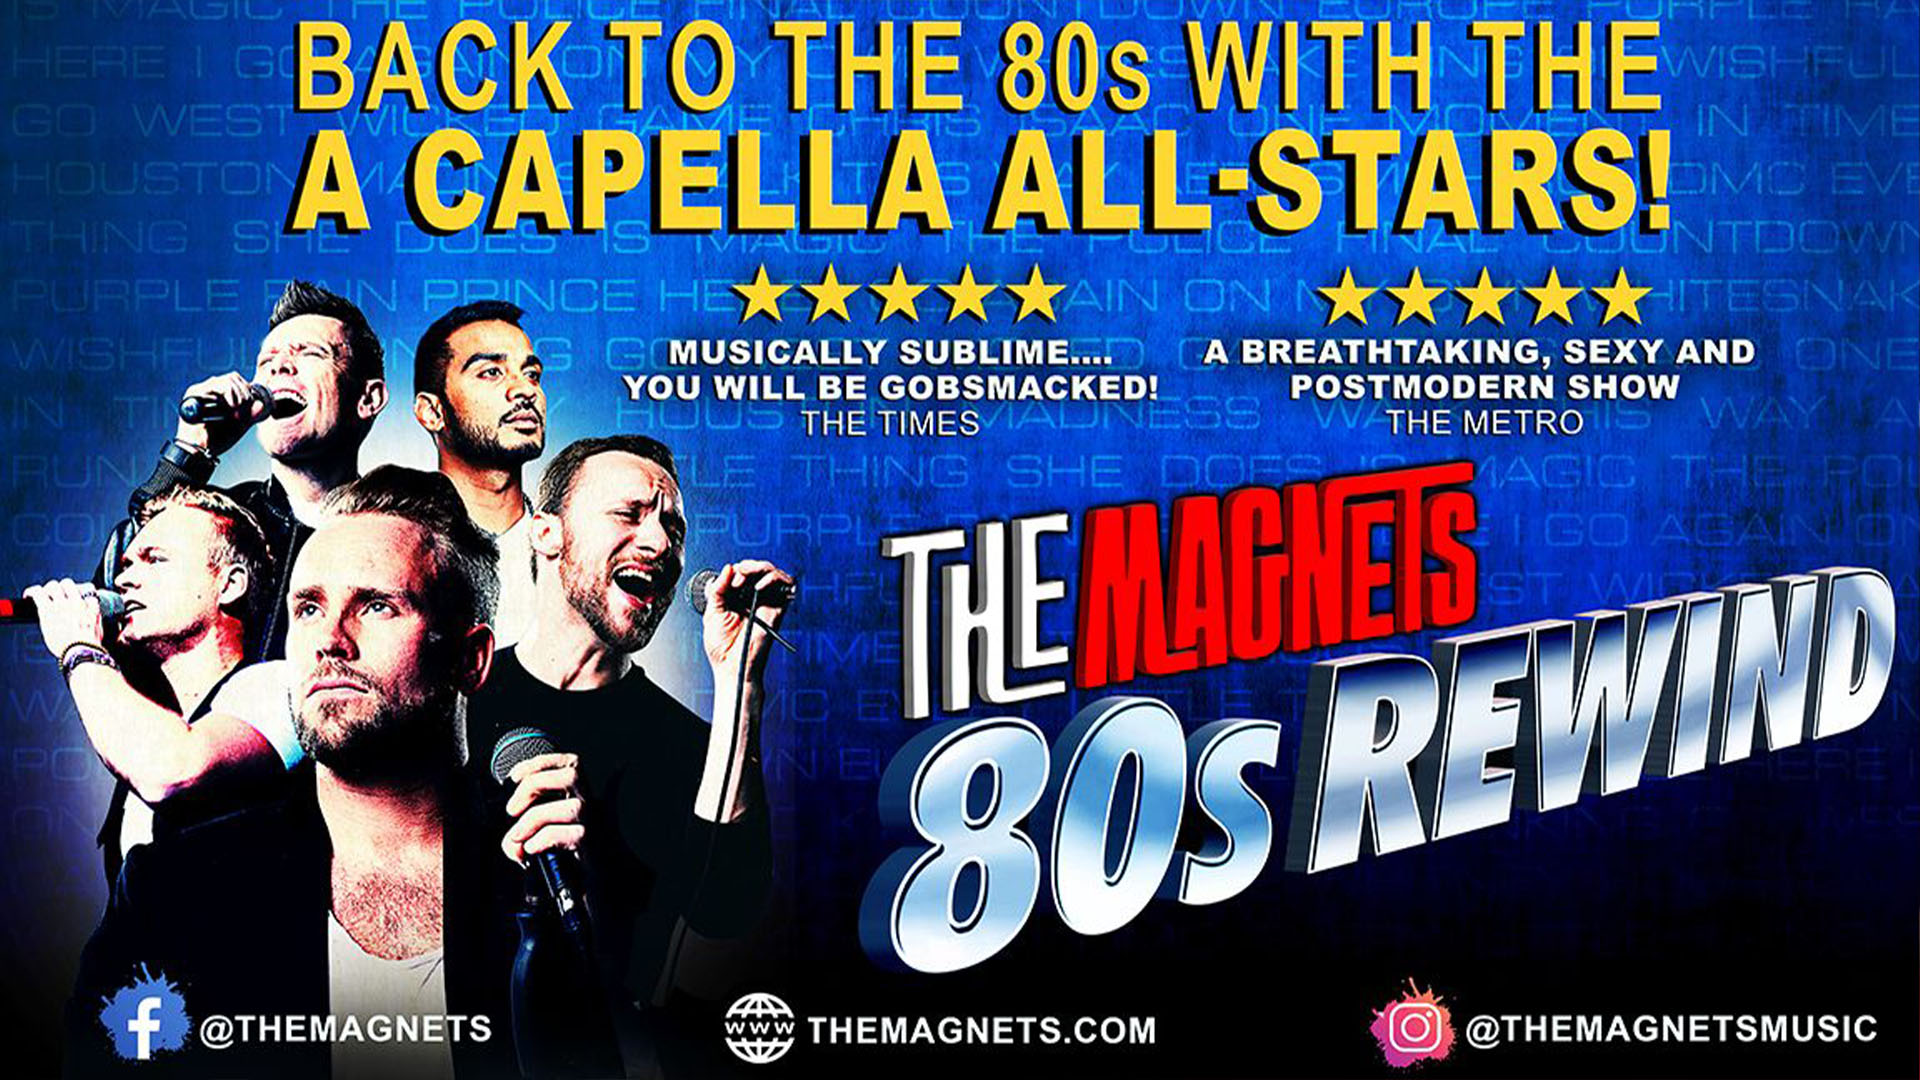 The Magnets 80s Rewind